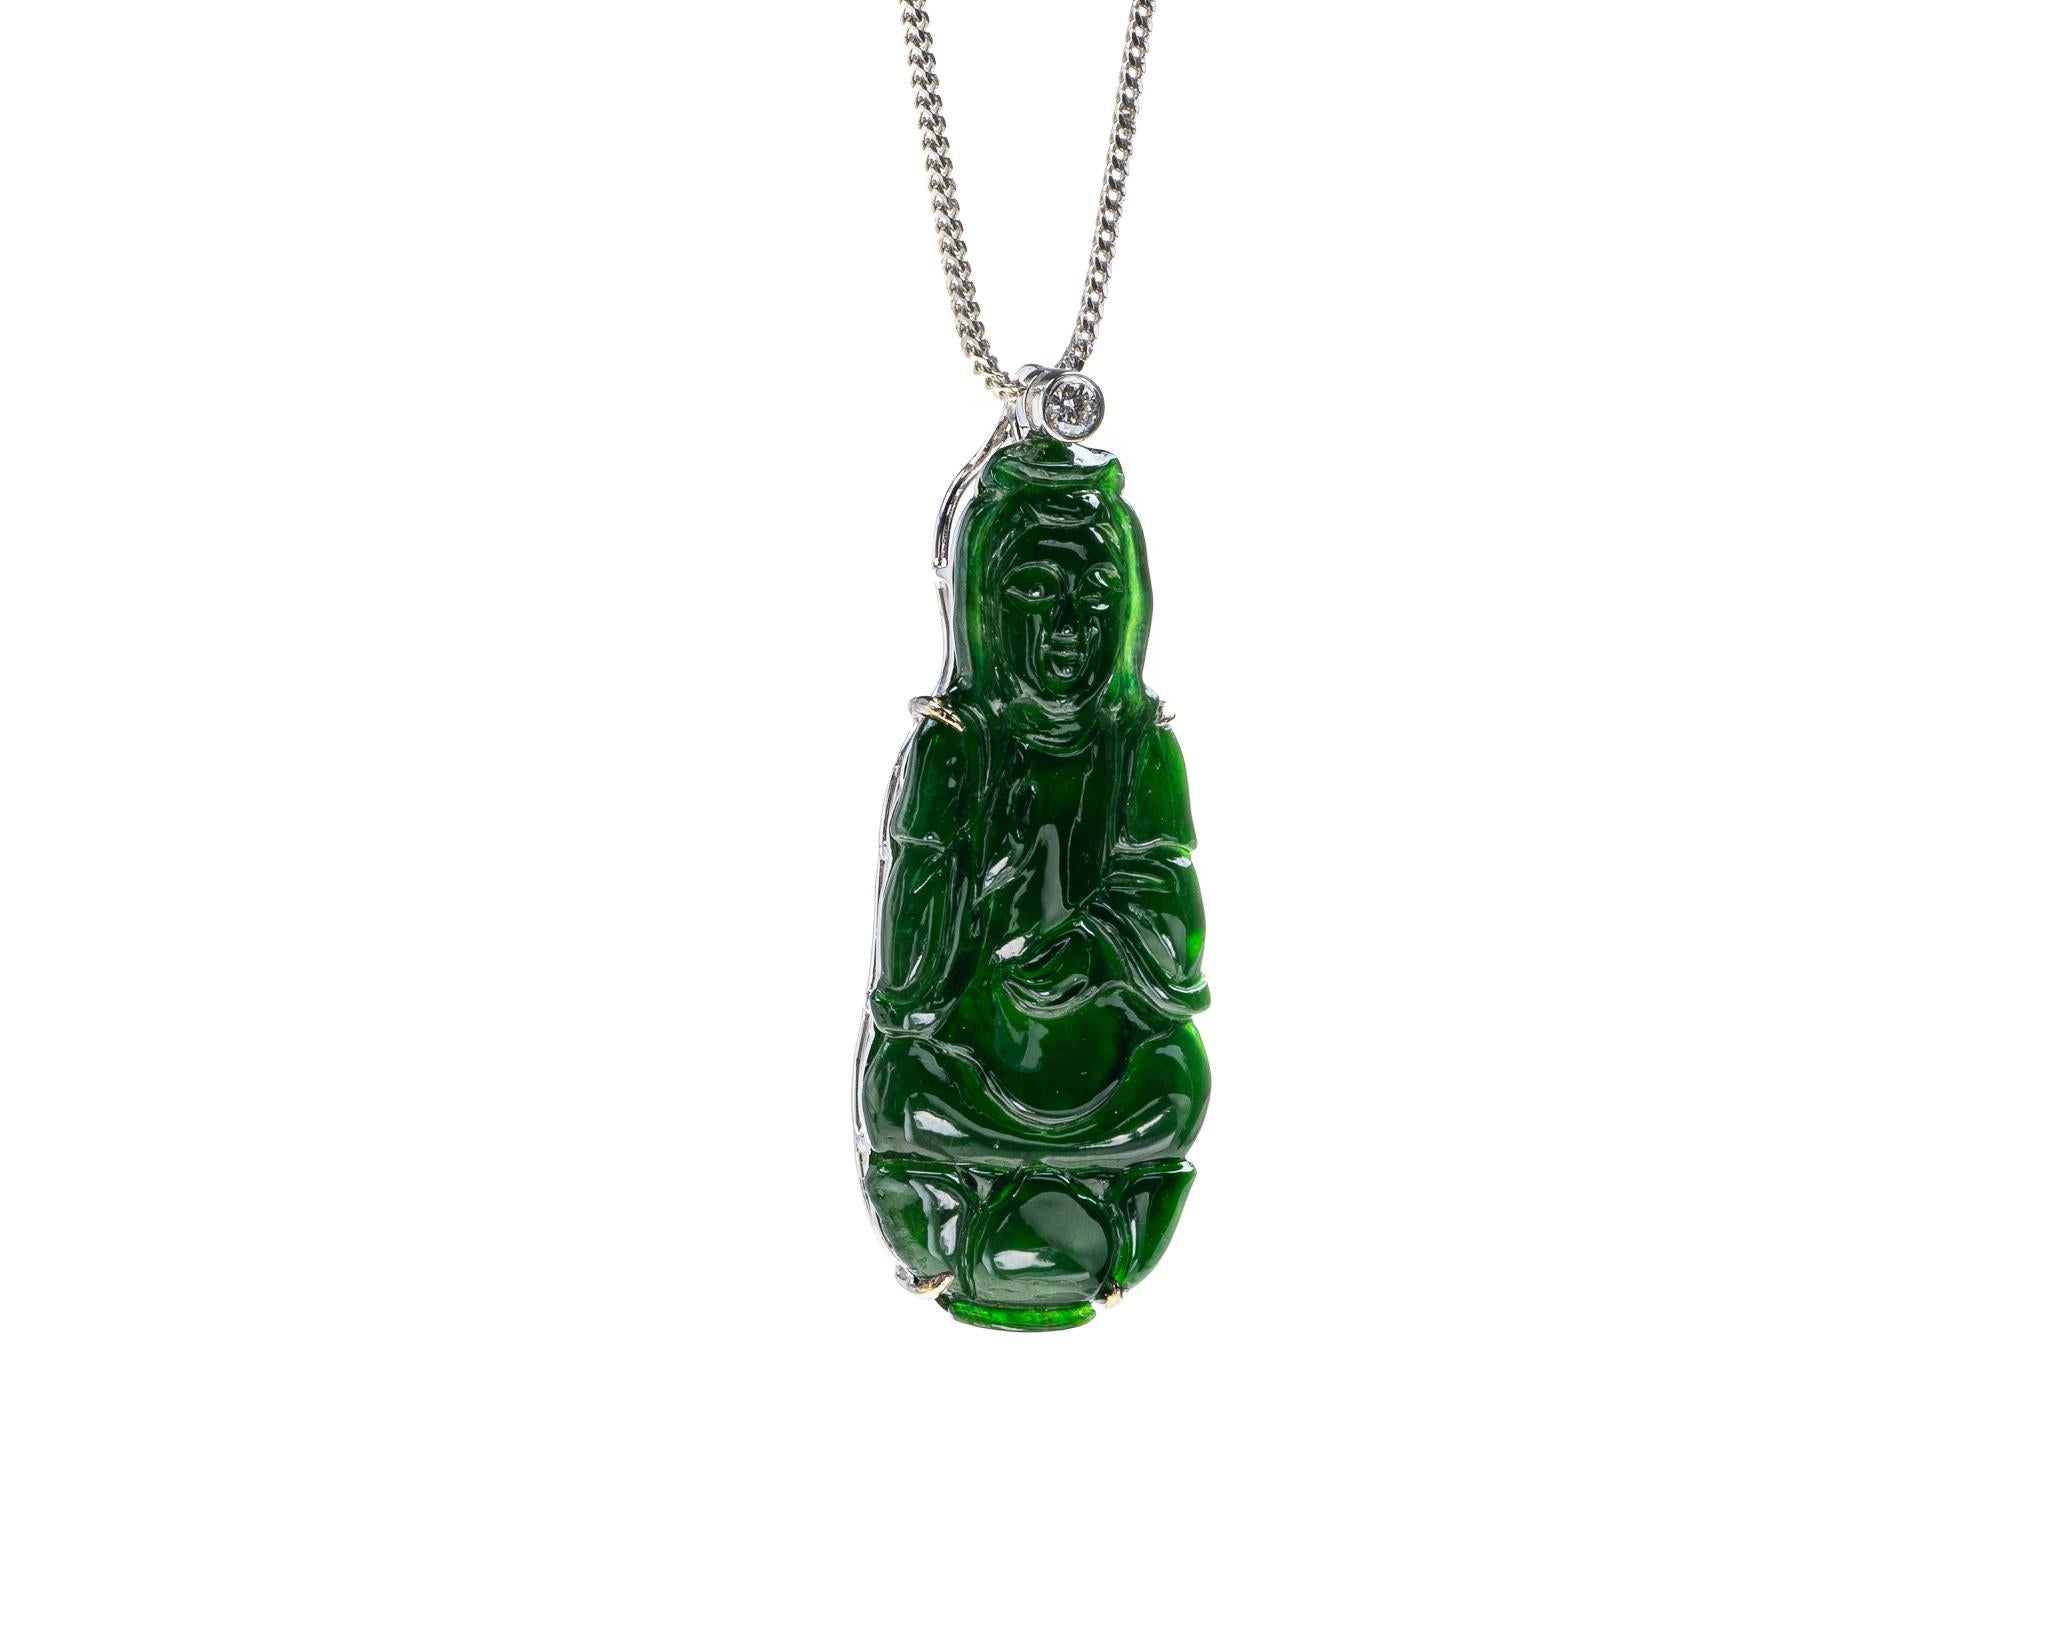 This is an all natural, untreated green jadeite jade carved Quan Yin god pendant set on an 18K white gold bail.  The carved Quan Yin god symbolizes compassion and protection. 

It measures 0.61  inches (15.7 mm) x 1.55 inches (39.5 mm) with